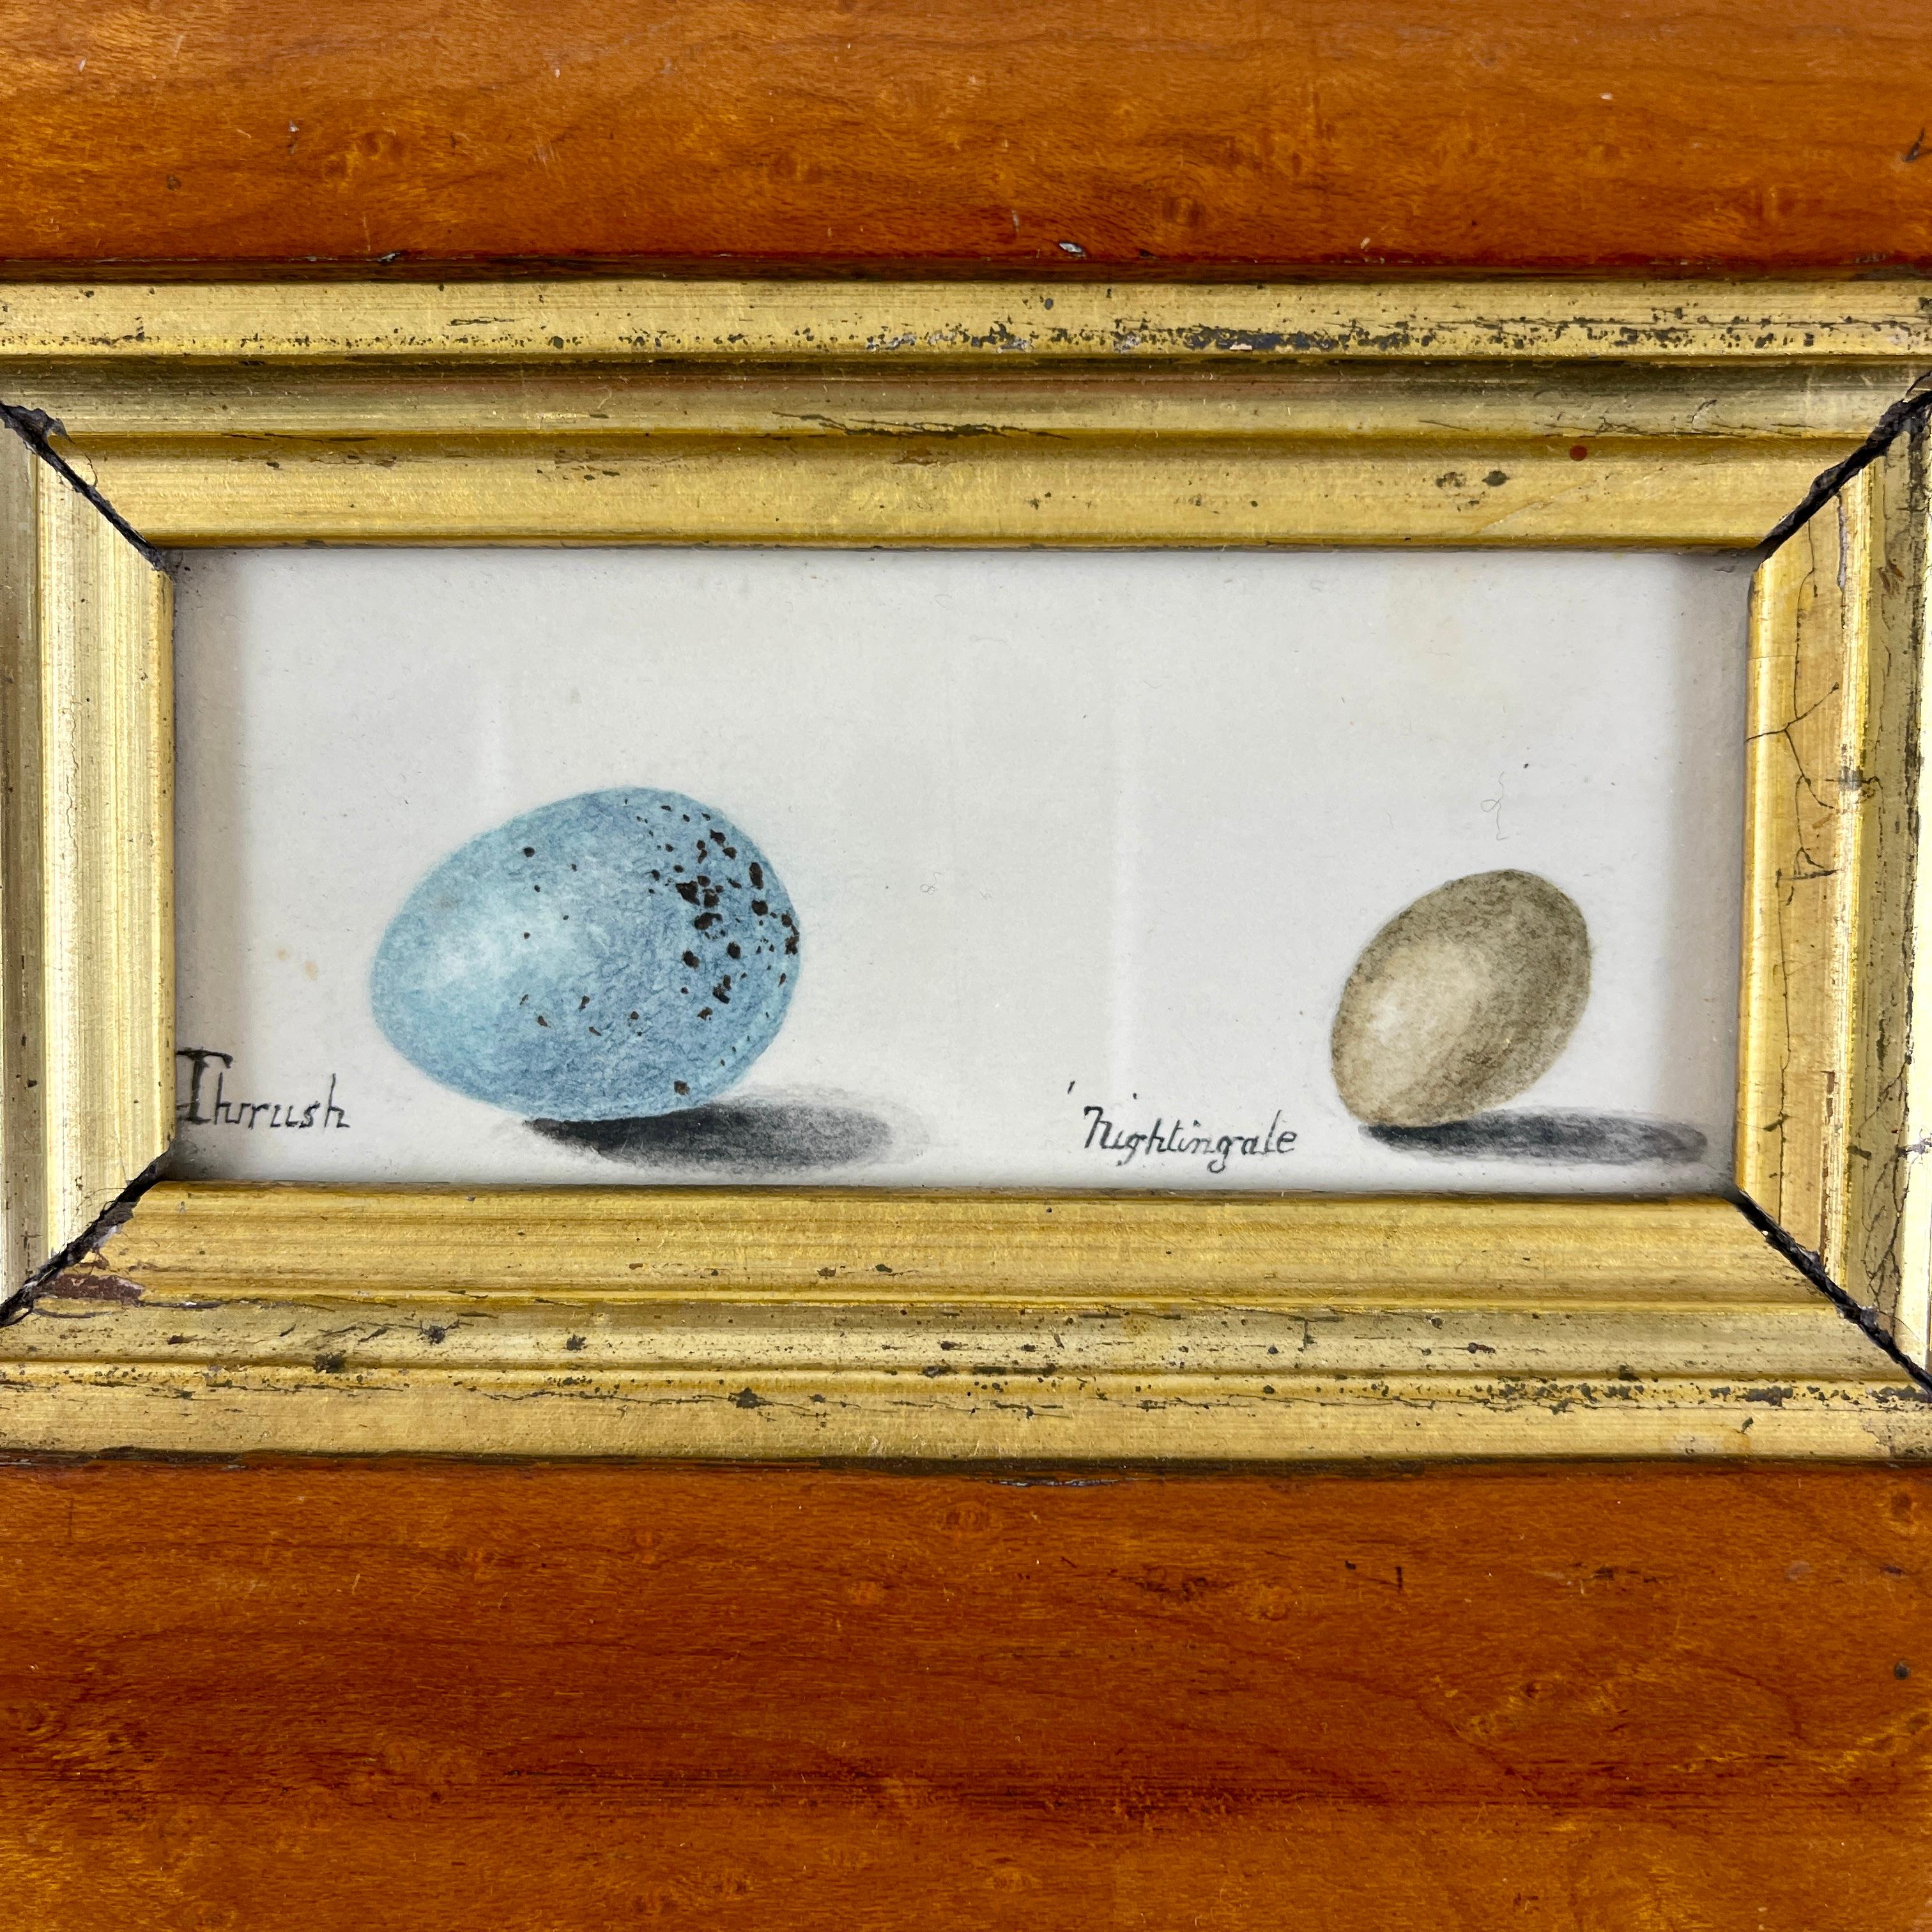 An original British School Regency Period watercolor study of two birds eggs, mounted in a Georgian Period Birdseye Maple frame – Circa 1835.

These watercolors were largely painted by young girls from aristocratic families during the Jane Austen